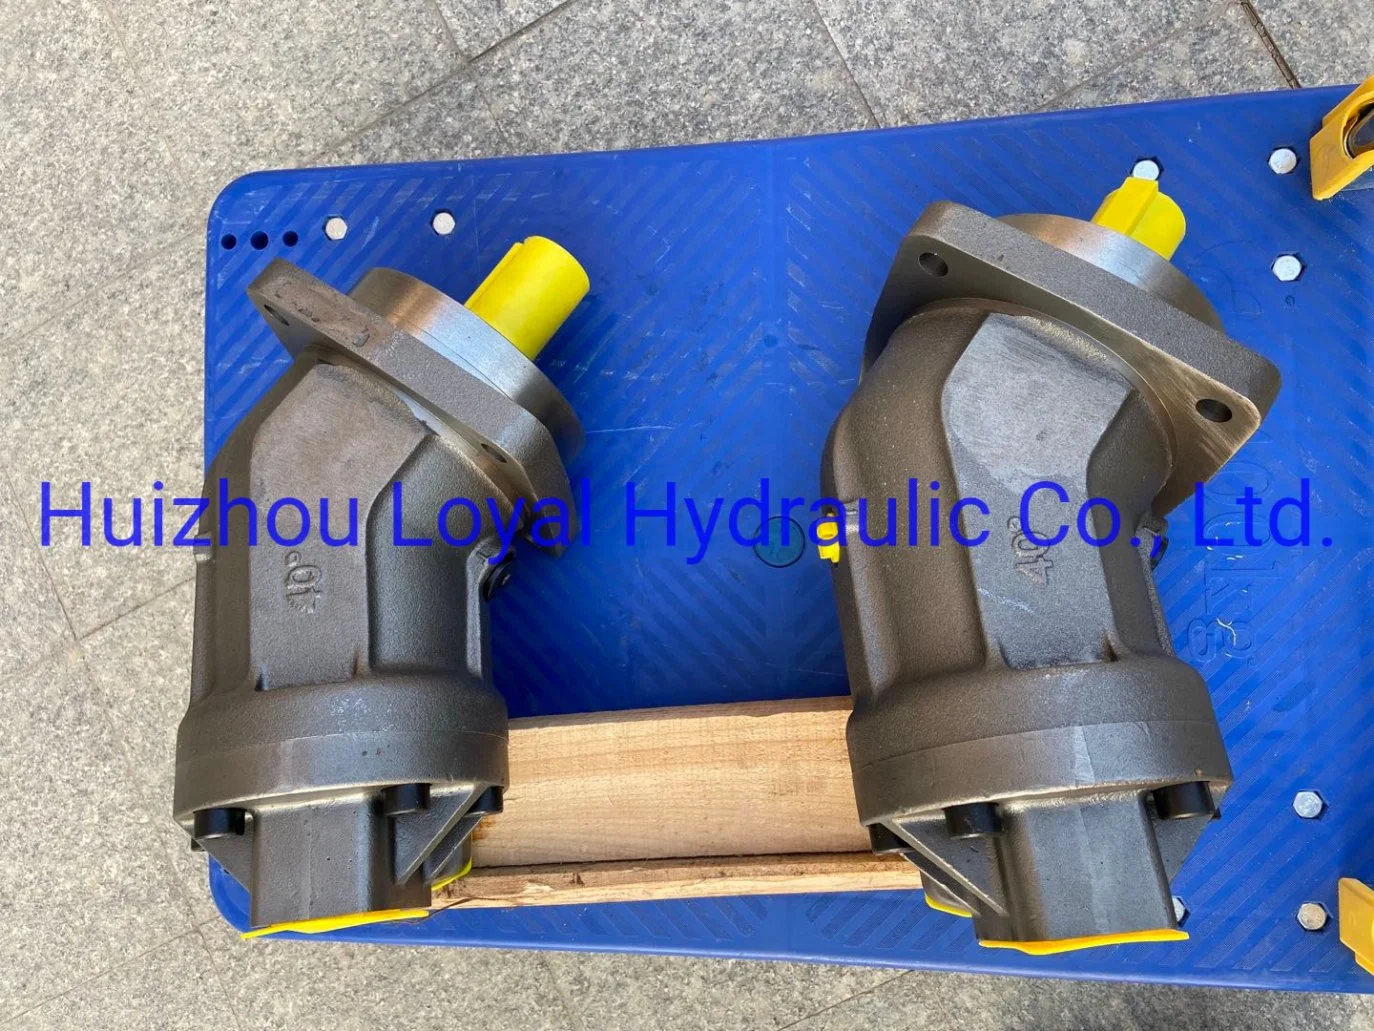 Hydraulic Pump A2fo16/A2fo23/A2fo28 Used for Excavator, Concrete Pump, Agricultural Machinery